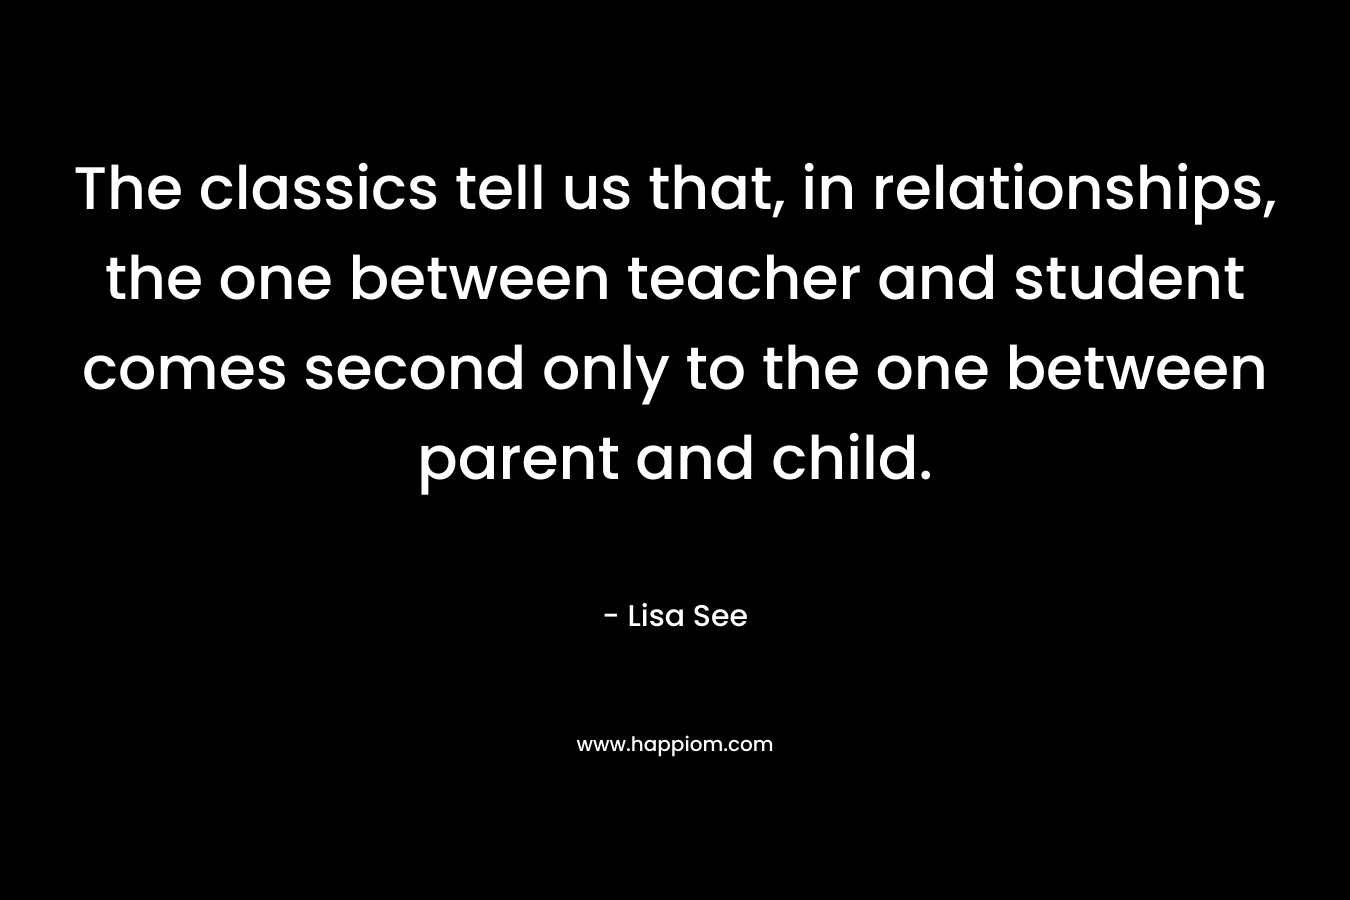 The classics tell us that, in relationships, the one between teacher and student comes second only to the one between parent and child. – Lisa See